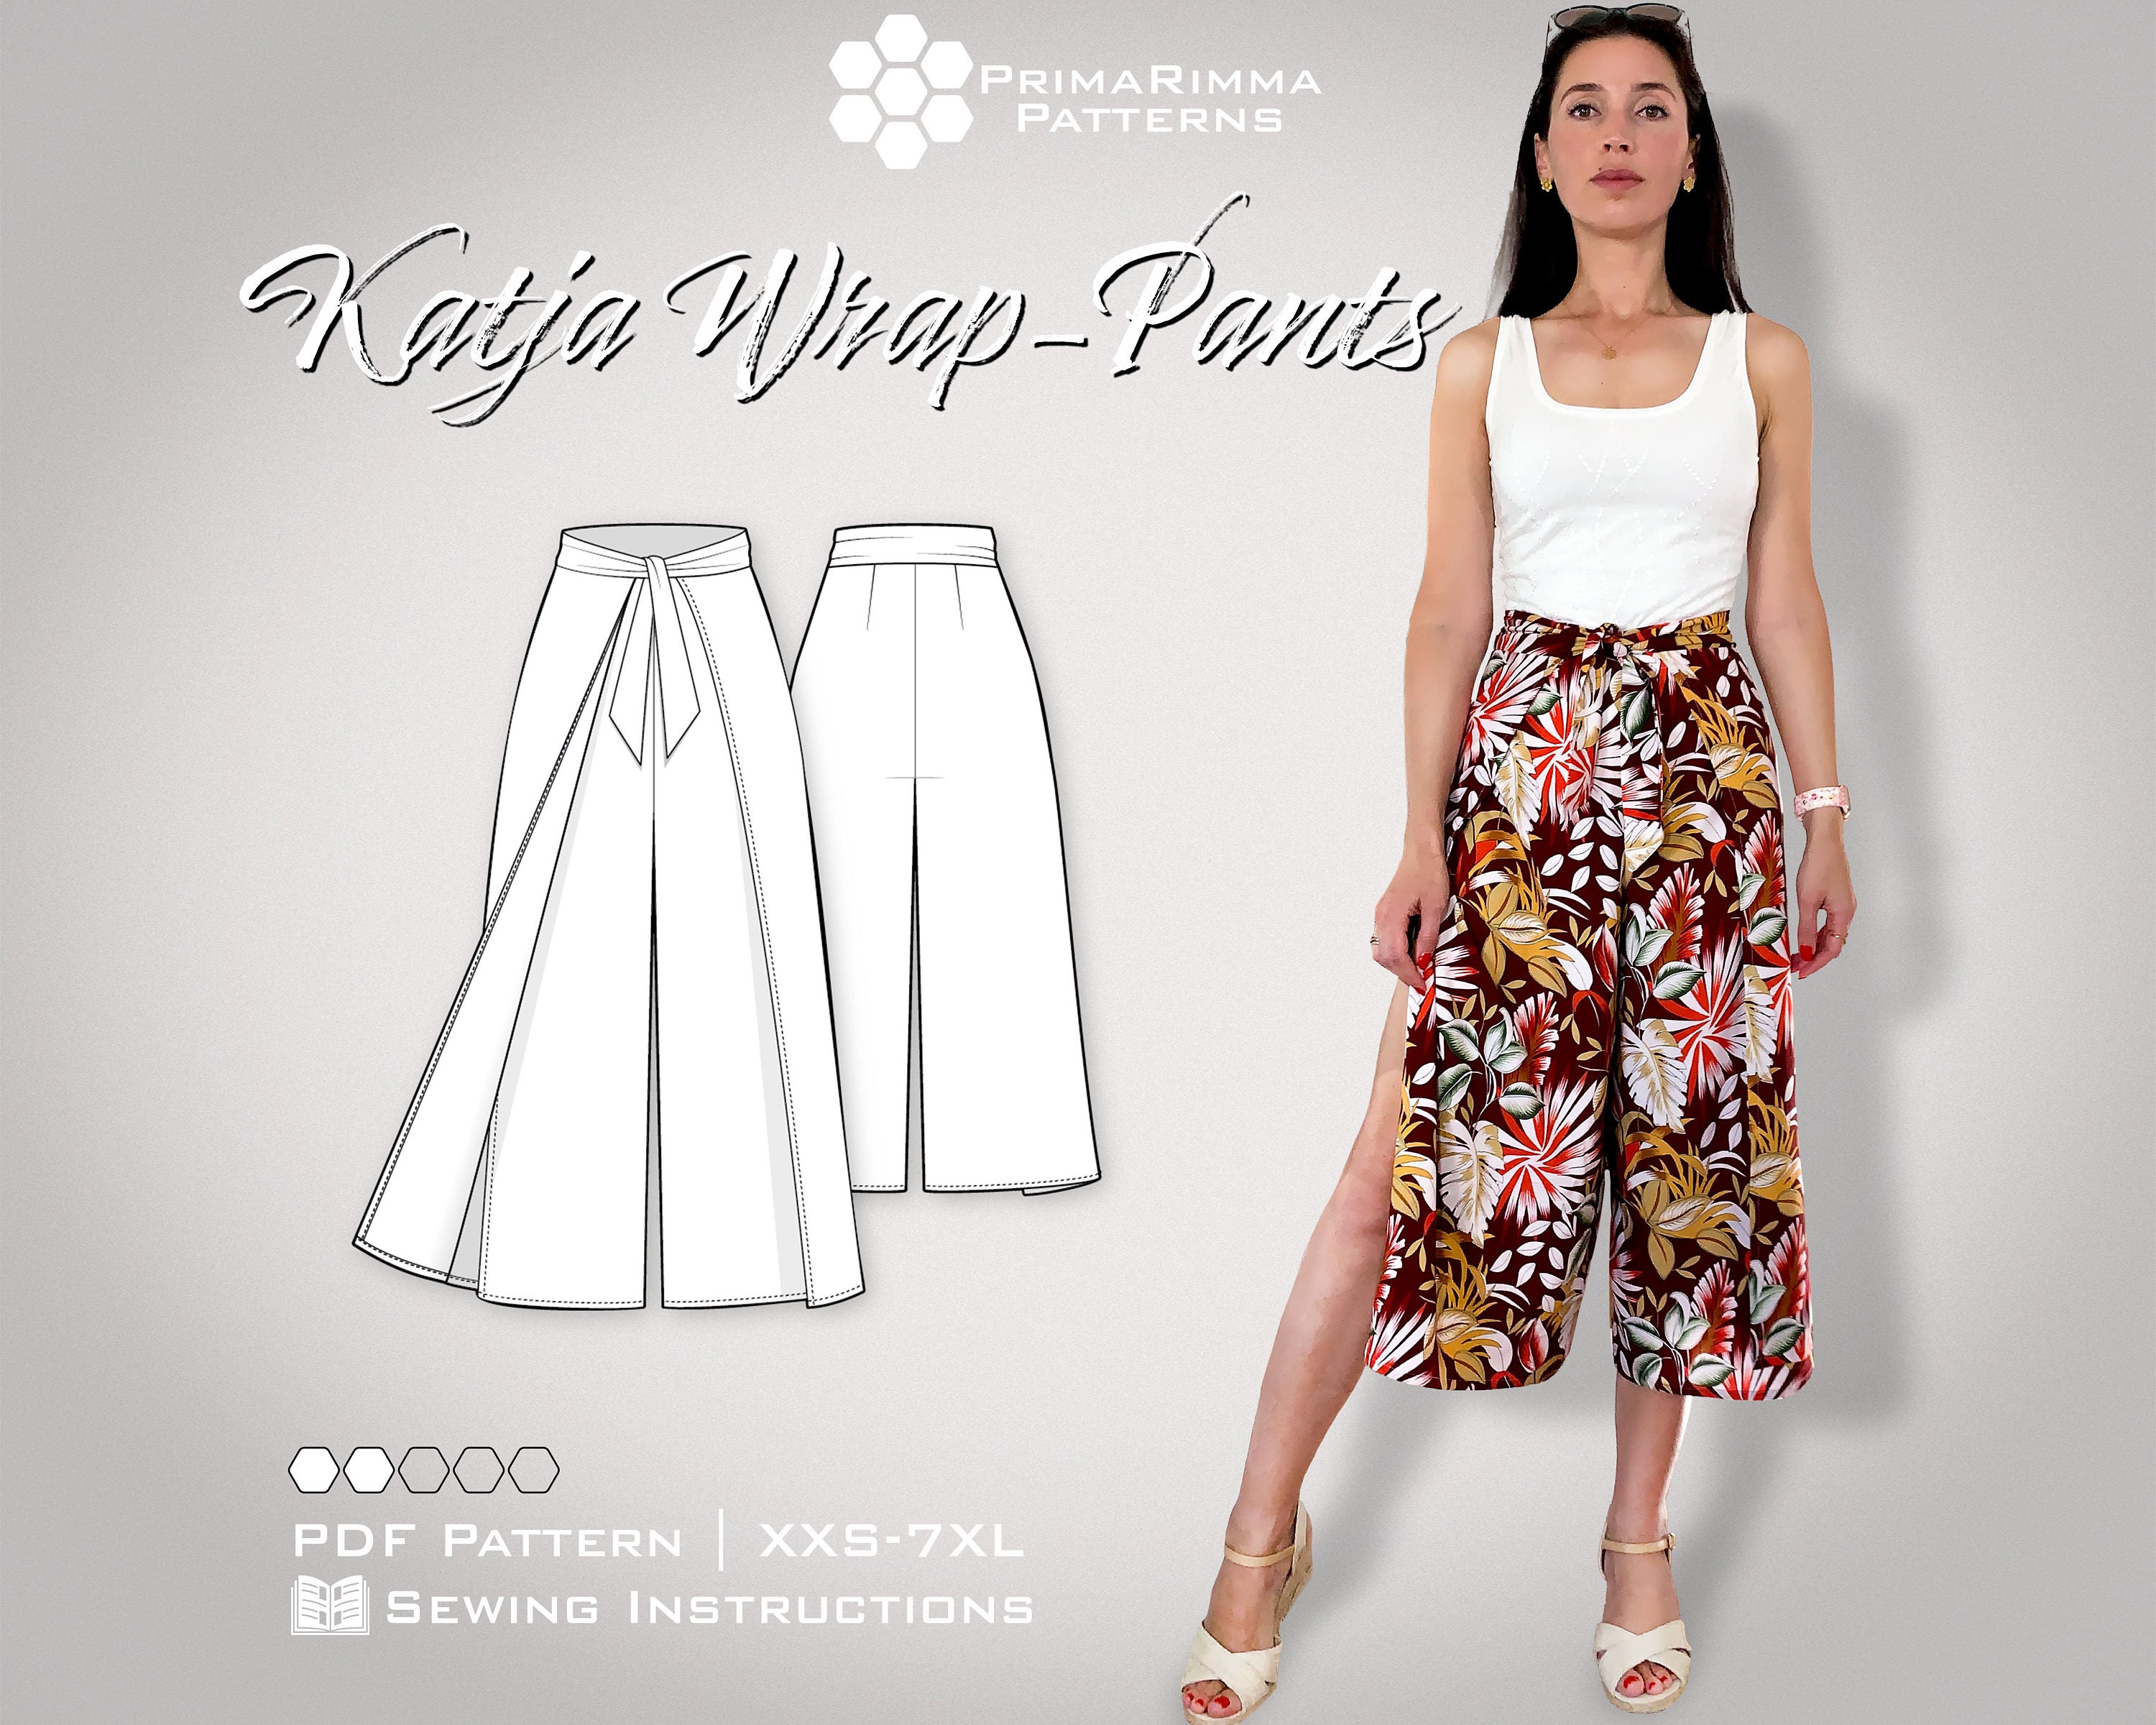 The Easy Breezy Eco Voile Wrap Pant - Main  Wrap pants, Poolside pants,  High waisted flares